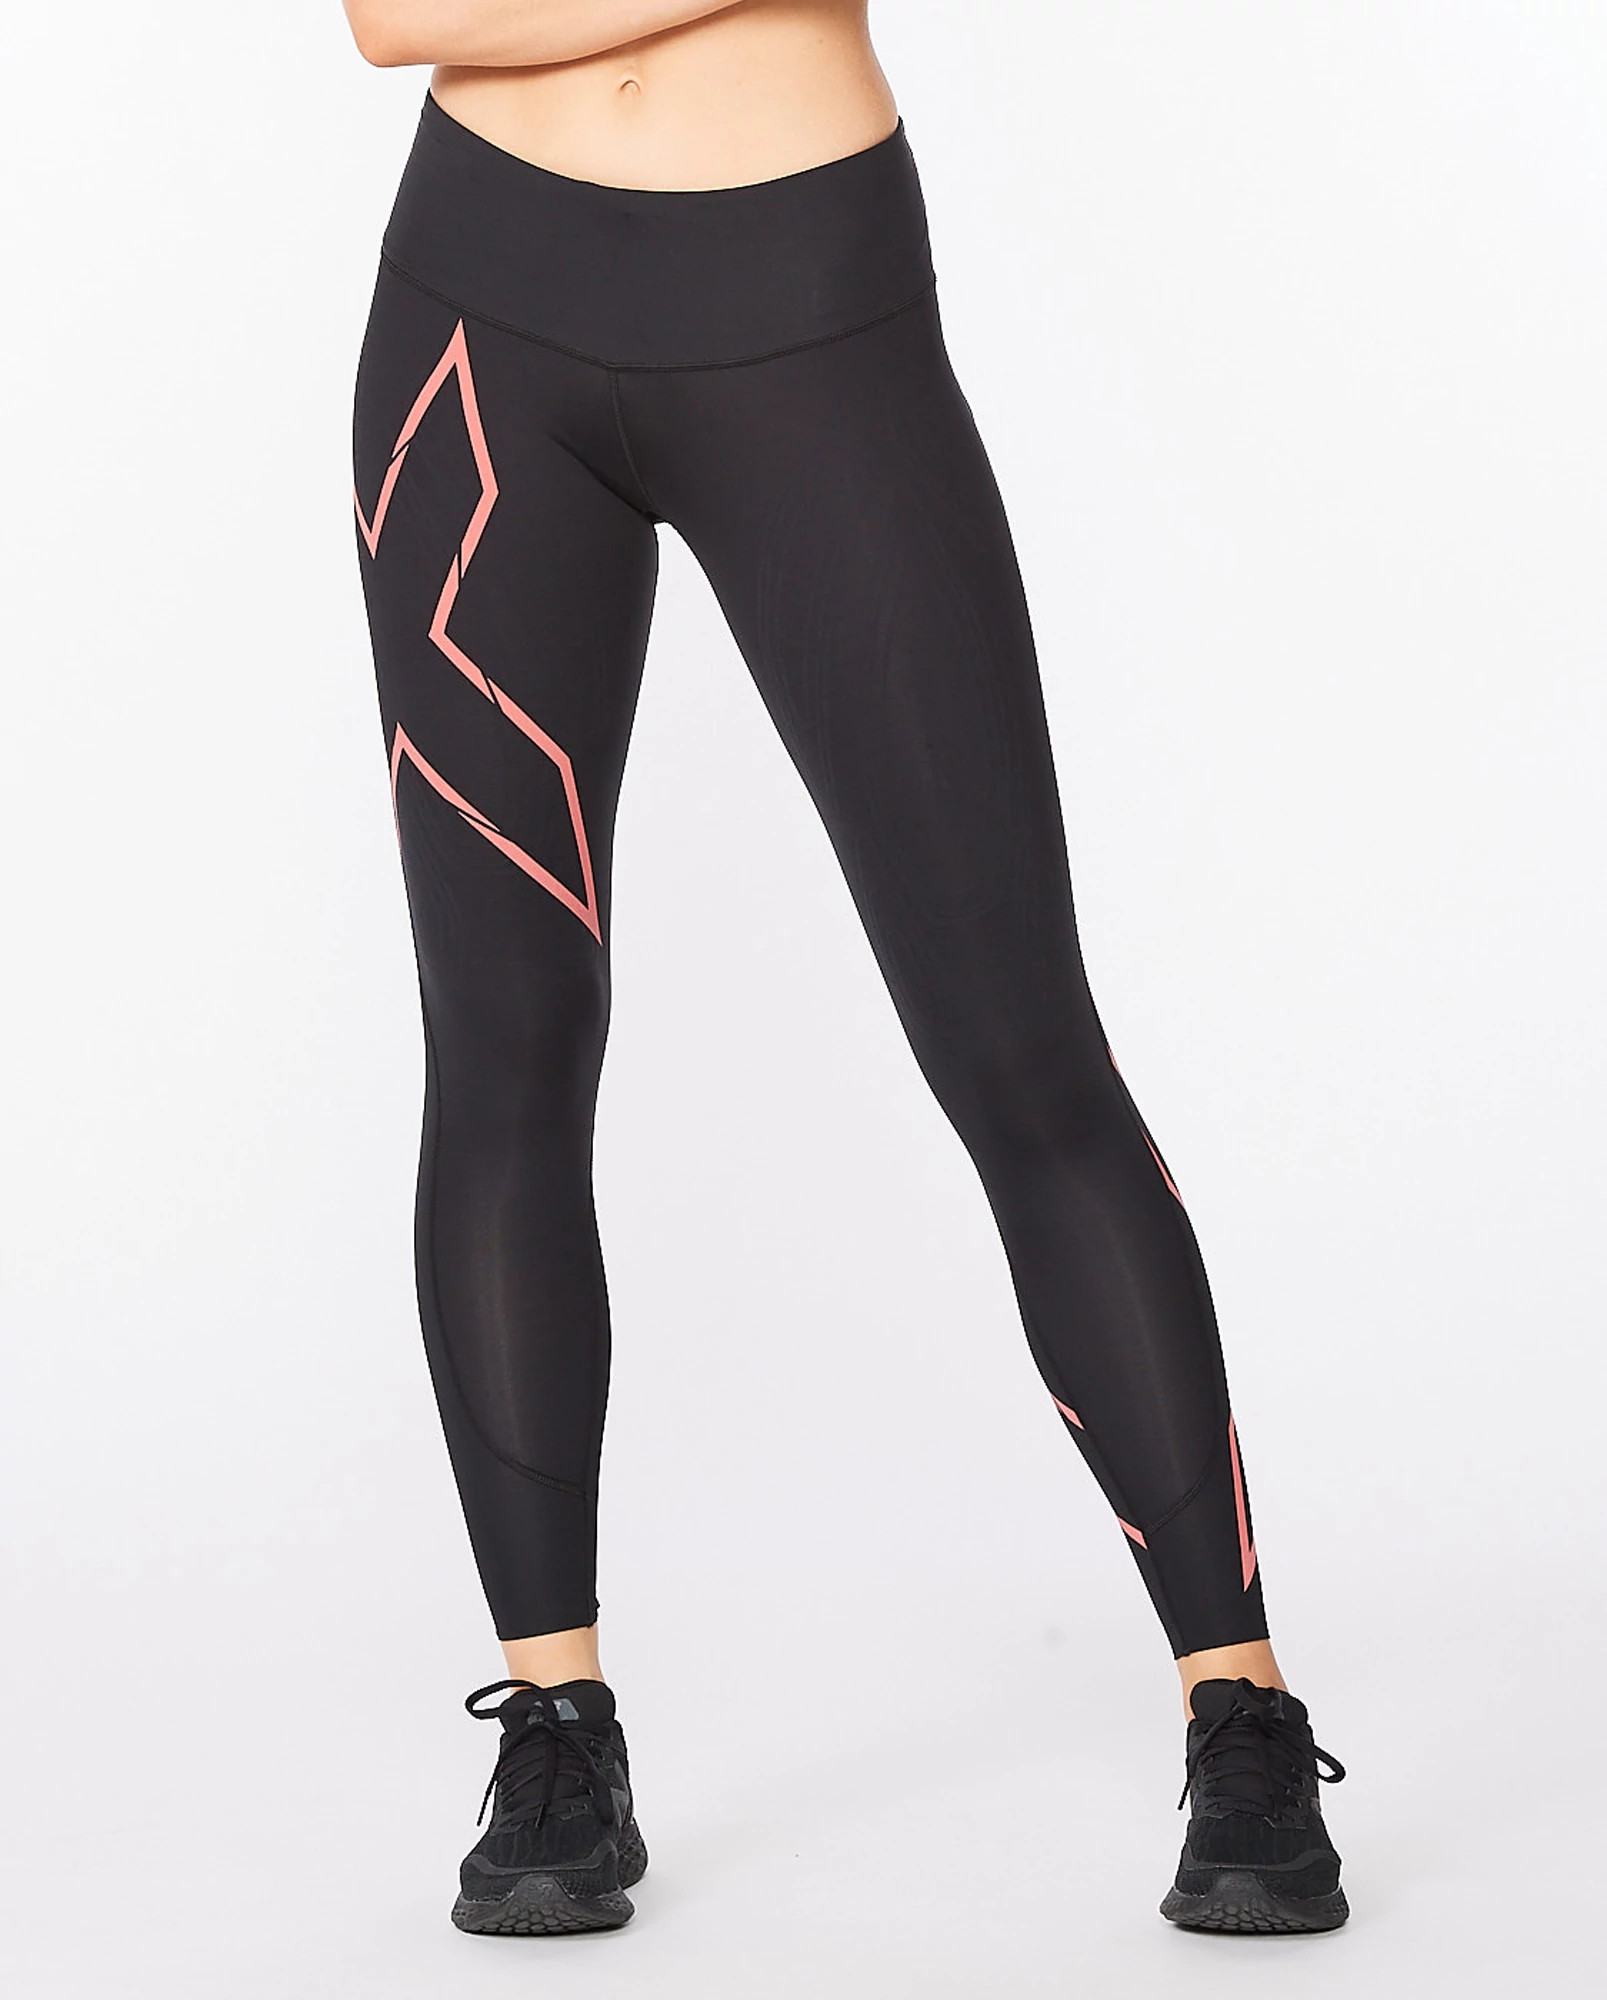 Gear Review: 2XU Women's Elite Compression Tights